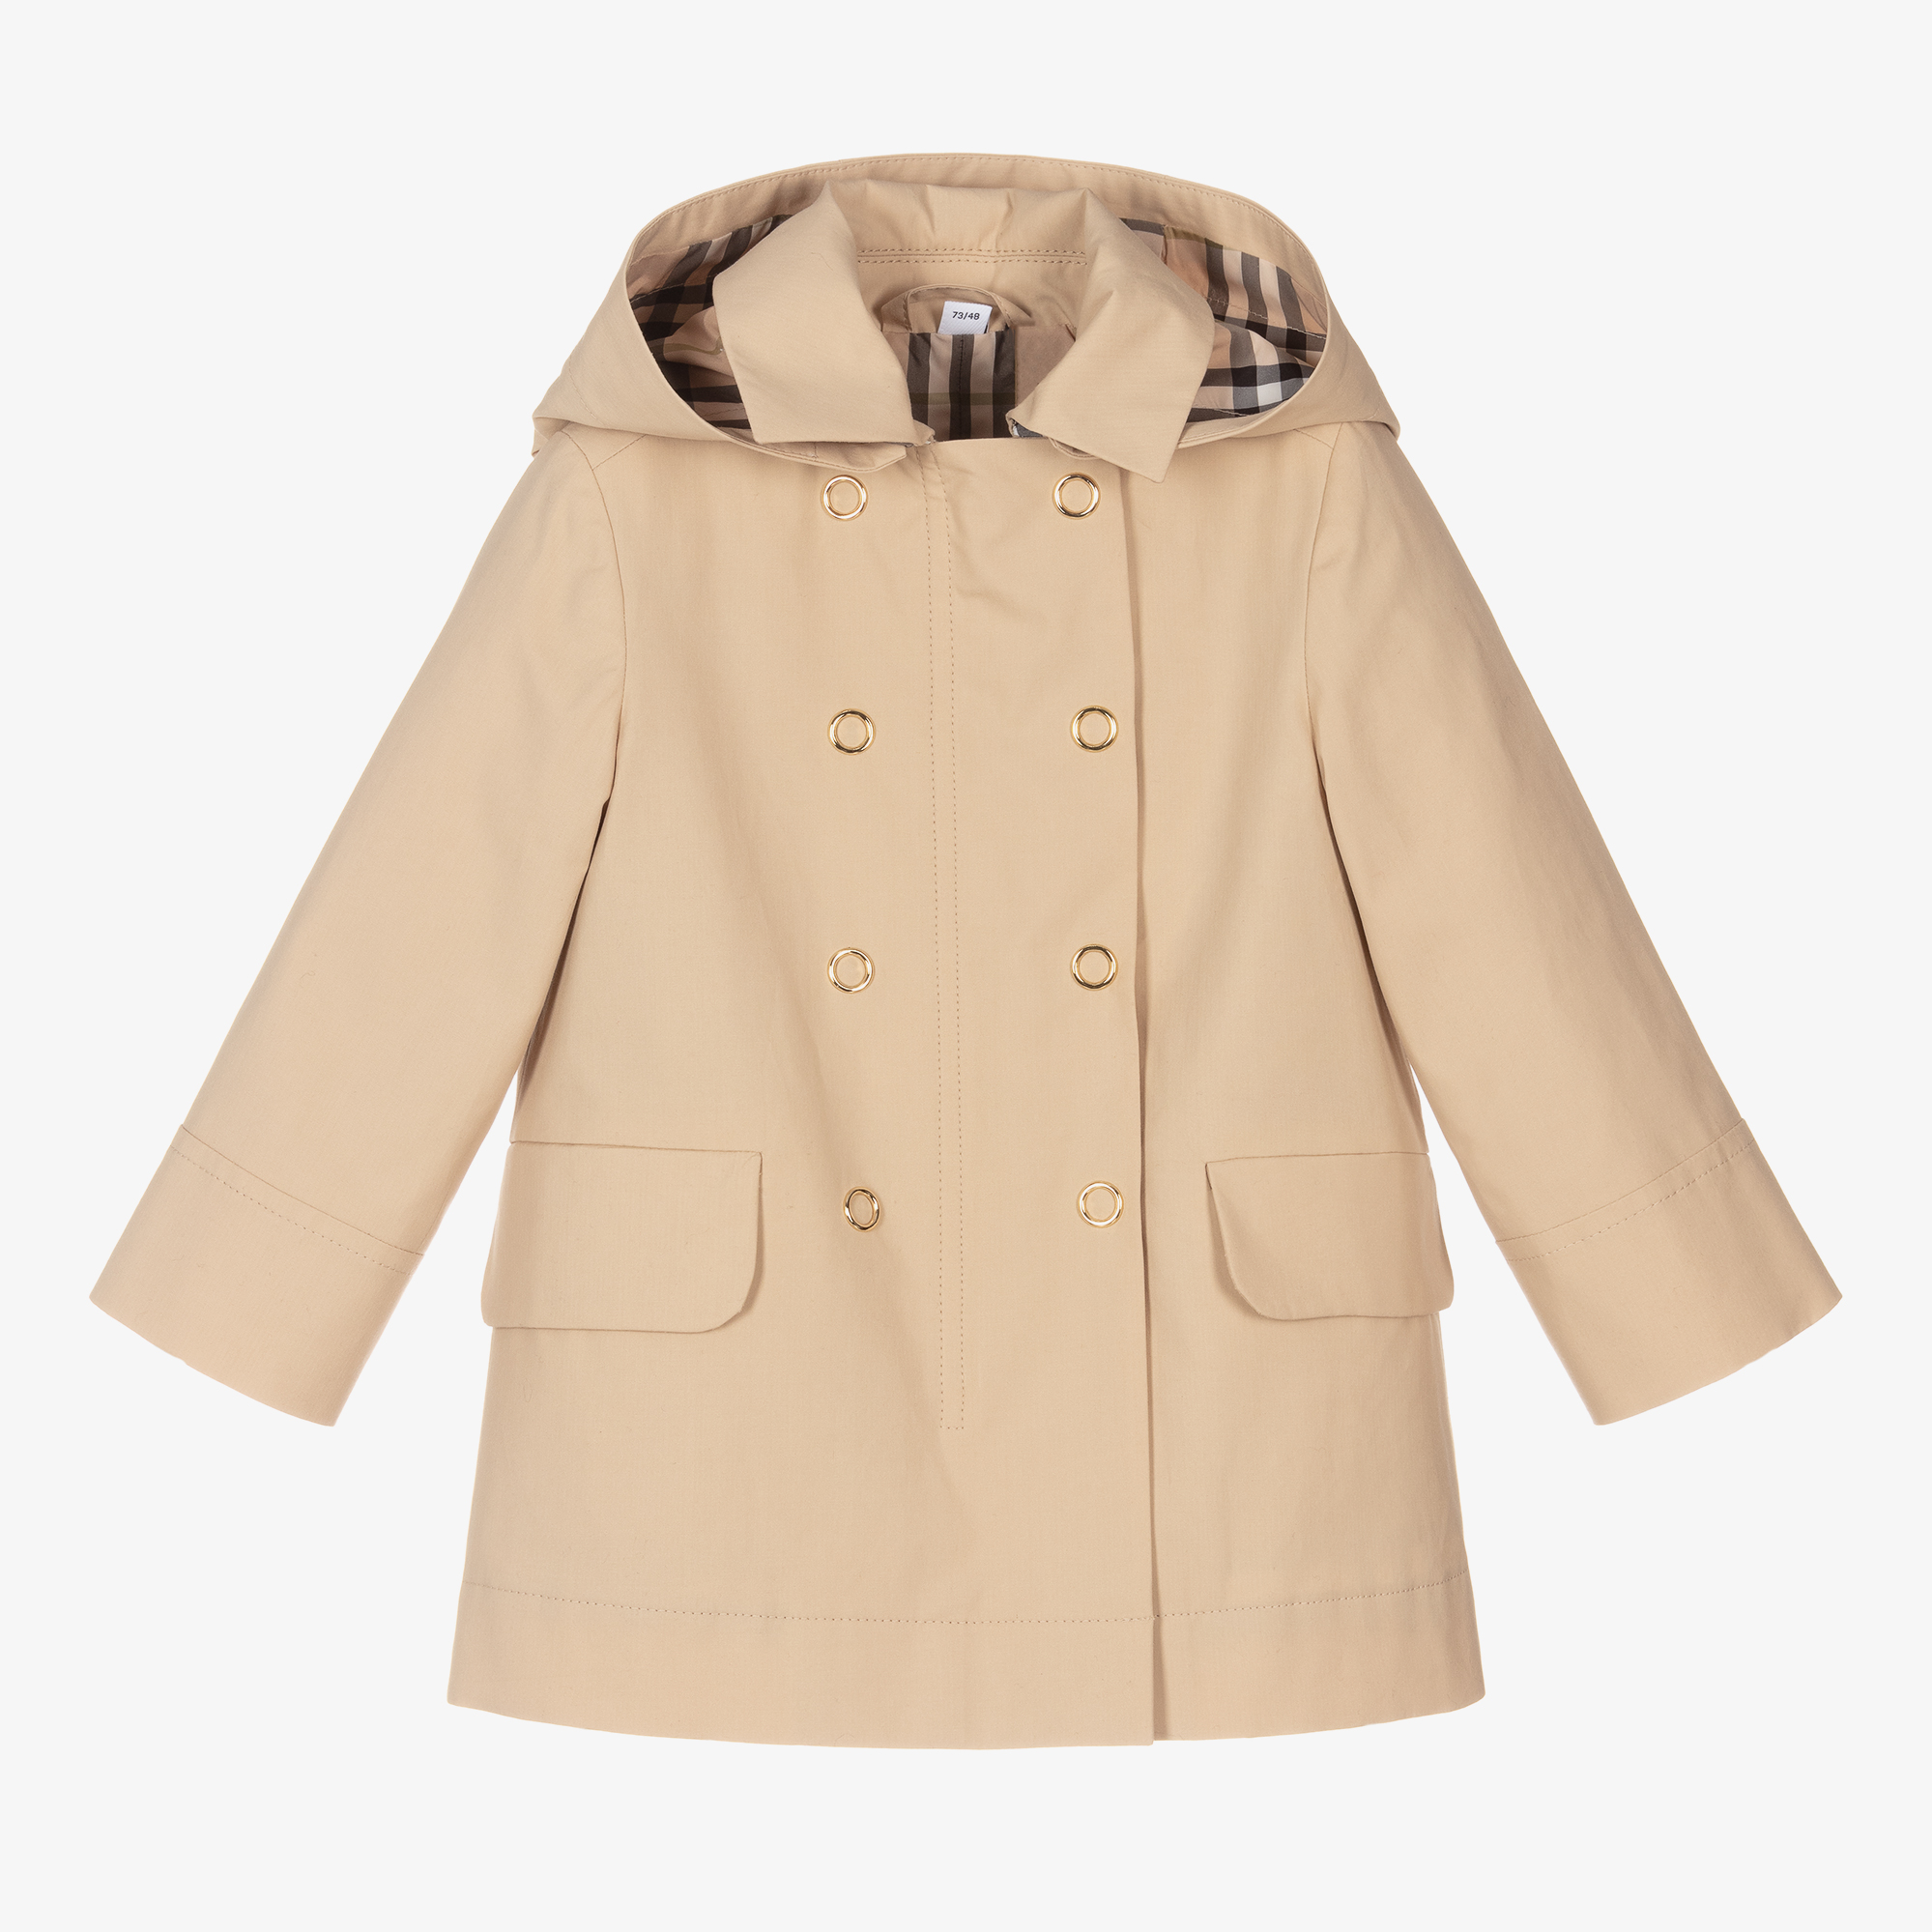 Burberry Baby Girls Beige Trench Coat | Childrensalon Outlet